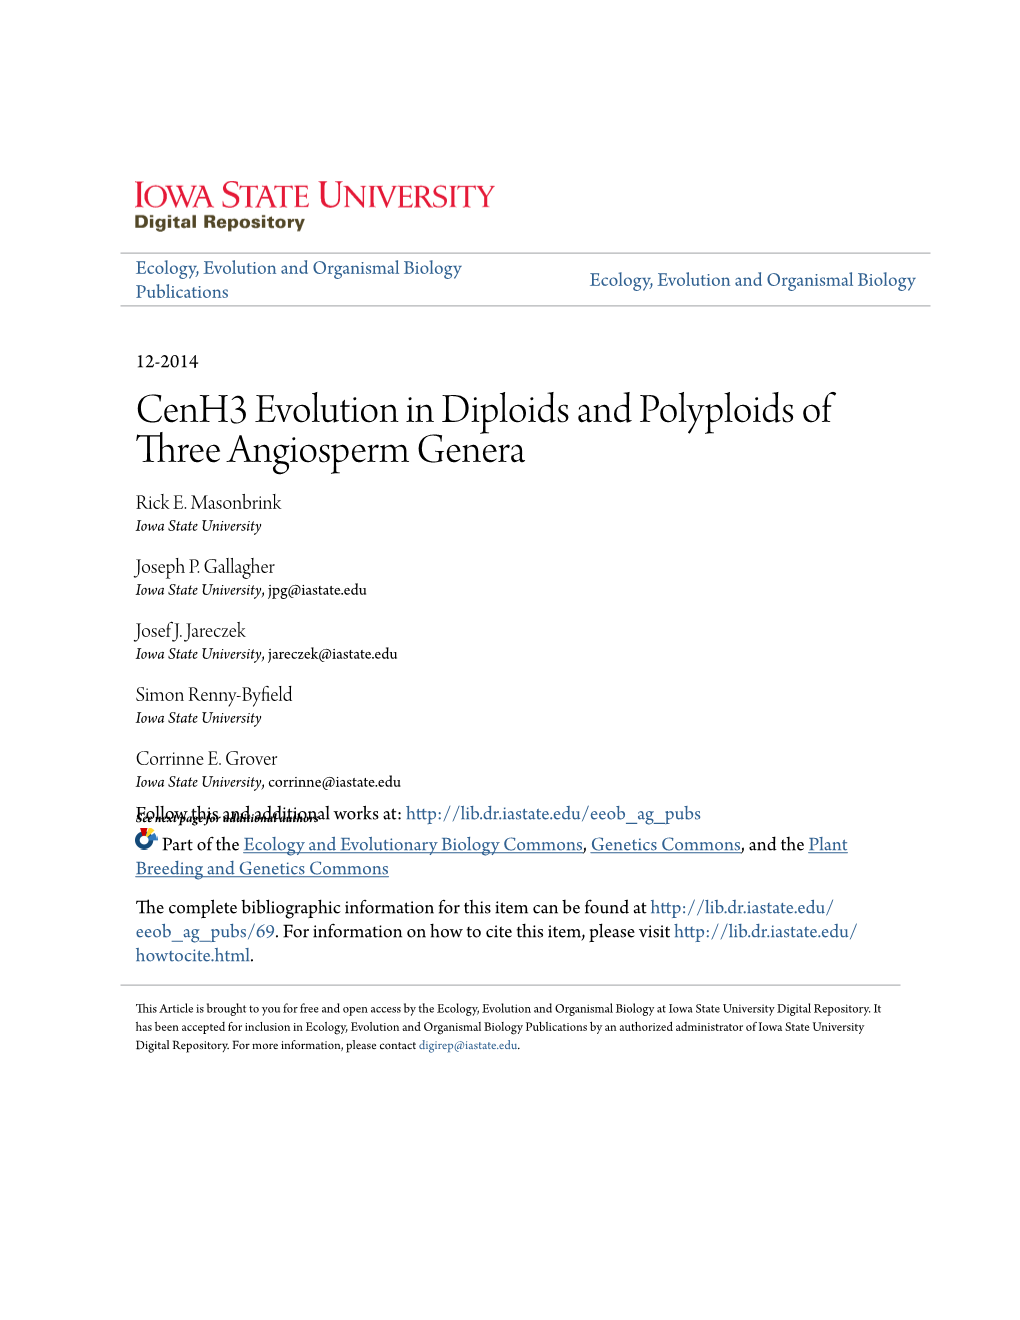 Cenh3 Evolution in Diploids and Polyploids of Three Angiosperm Genera Rick E